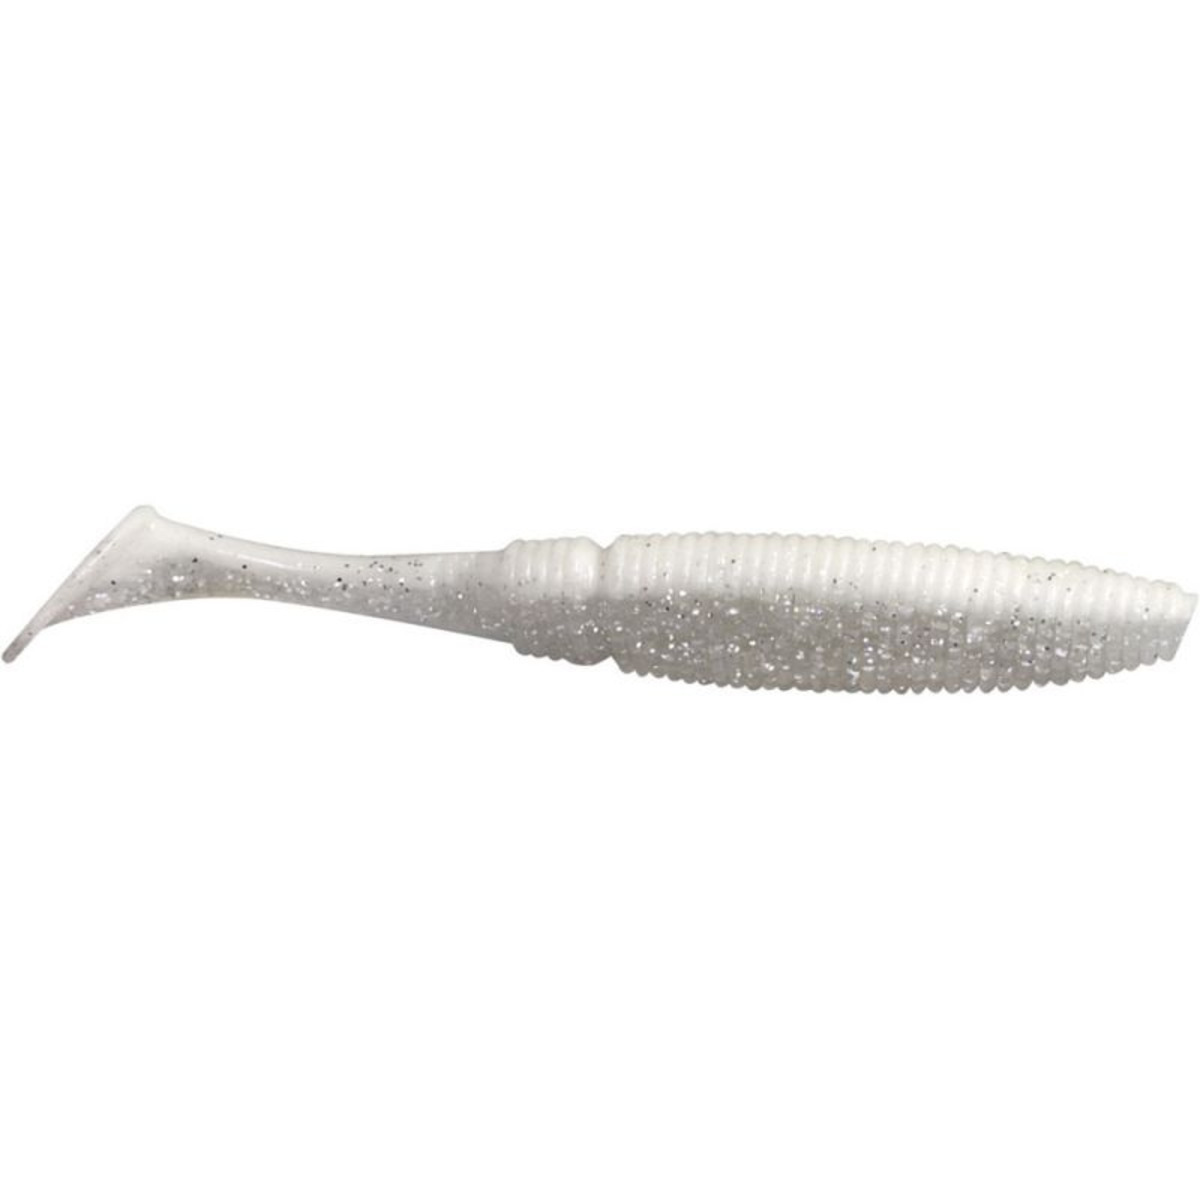 Rapture Power Shad - 17.5 cm - White Ghost